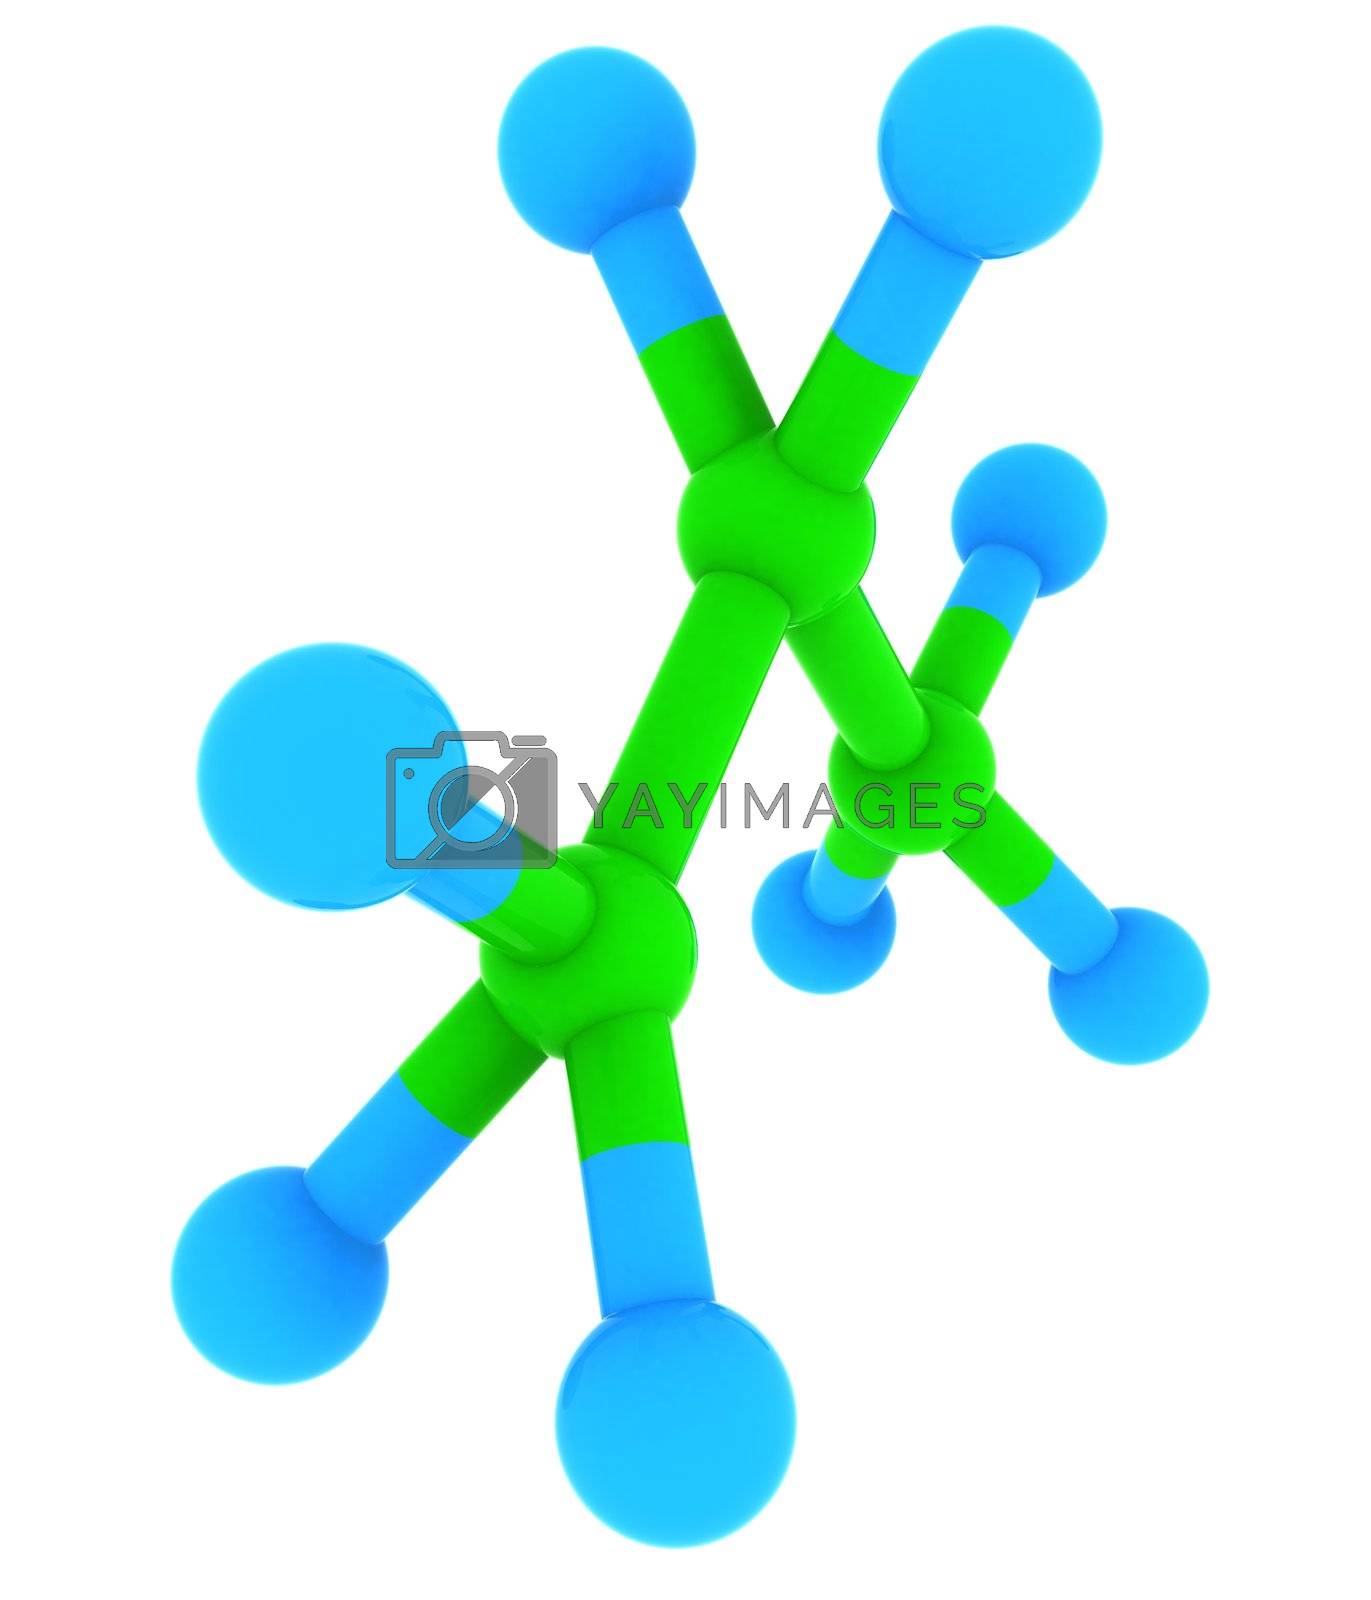 Royalty free image of Isolated 3d model of propane - C3H8 molecule
 by jareso